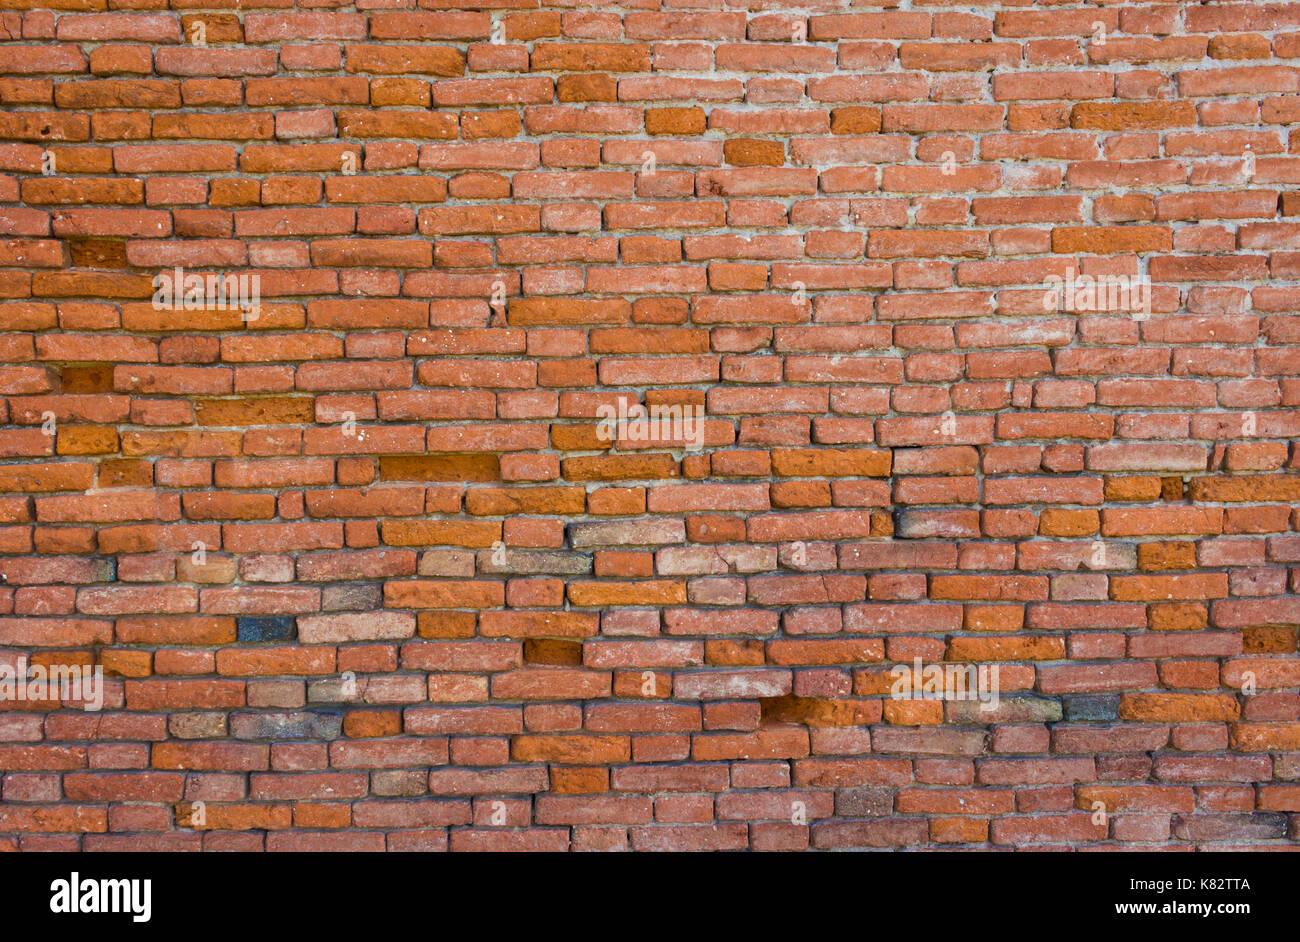 Old brick wall, old texture of red stone blocks closeup Stock Photo